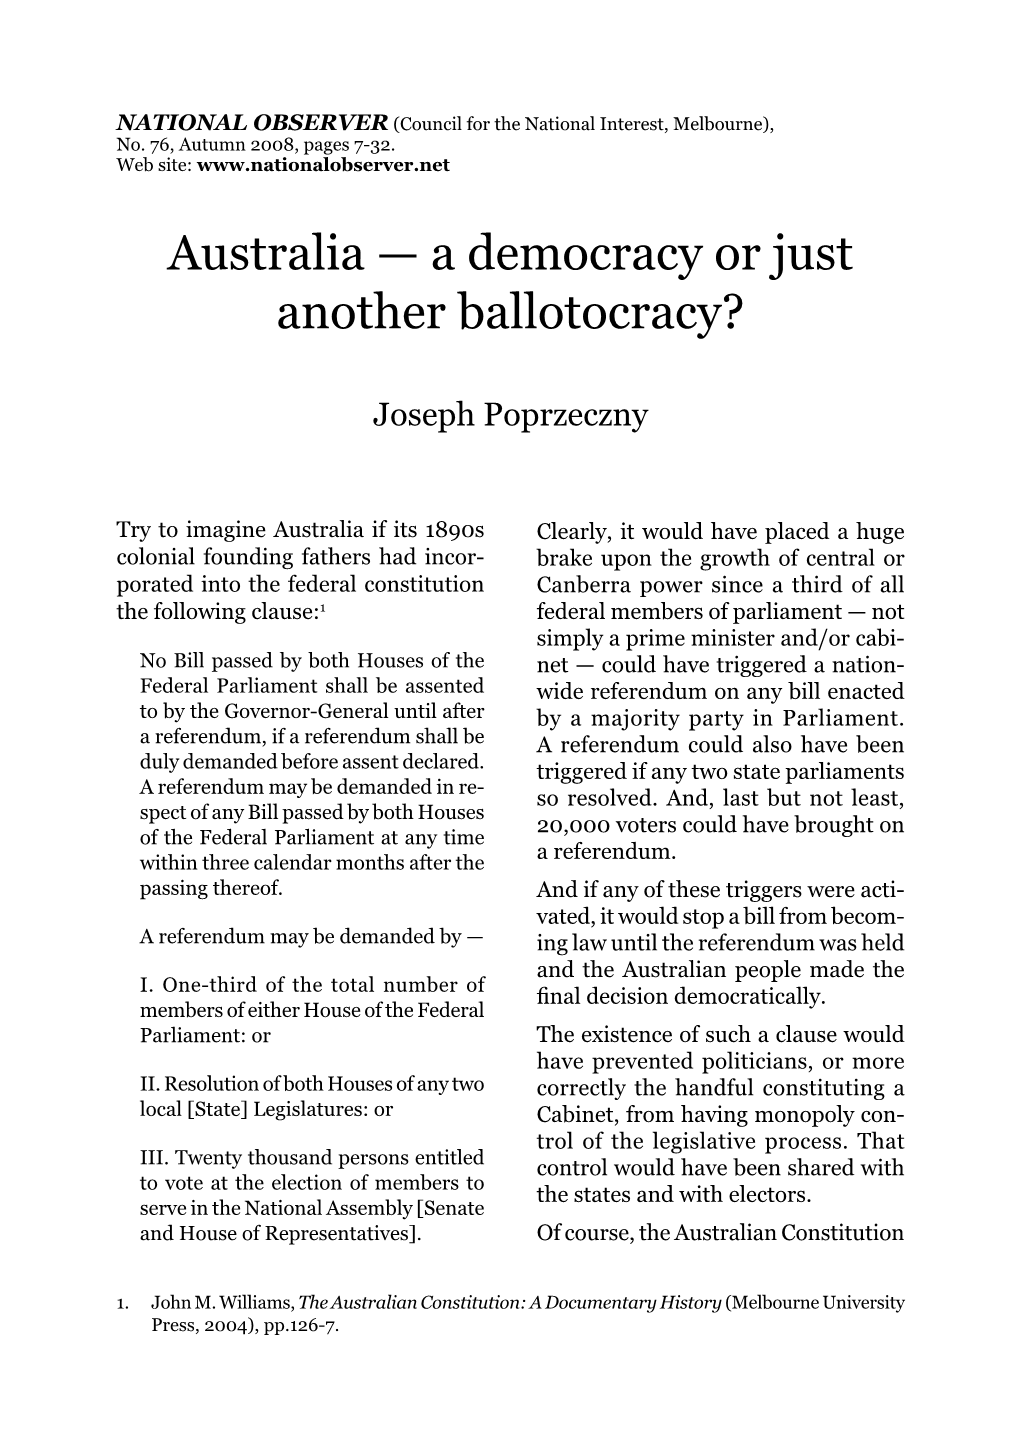 A Democracy Or Just Another Ballotocracy?